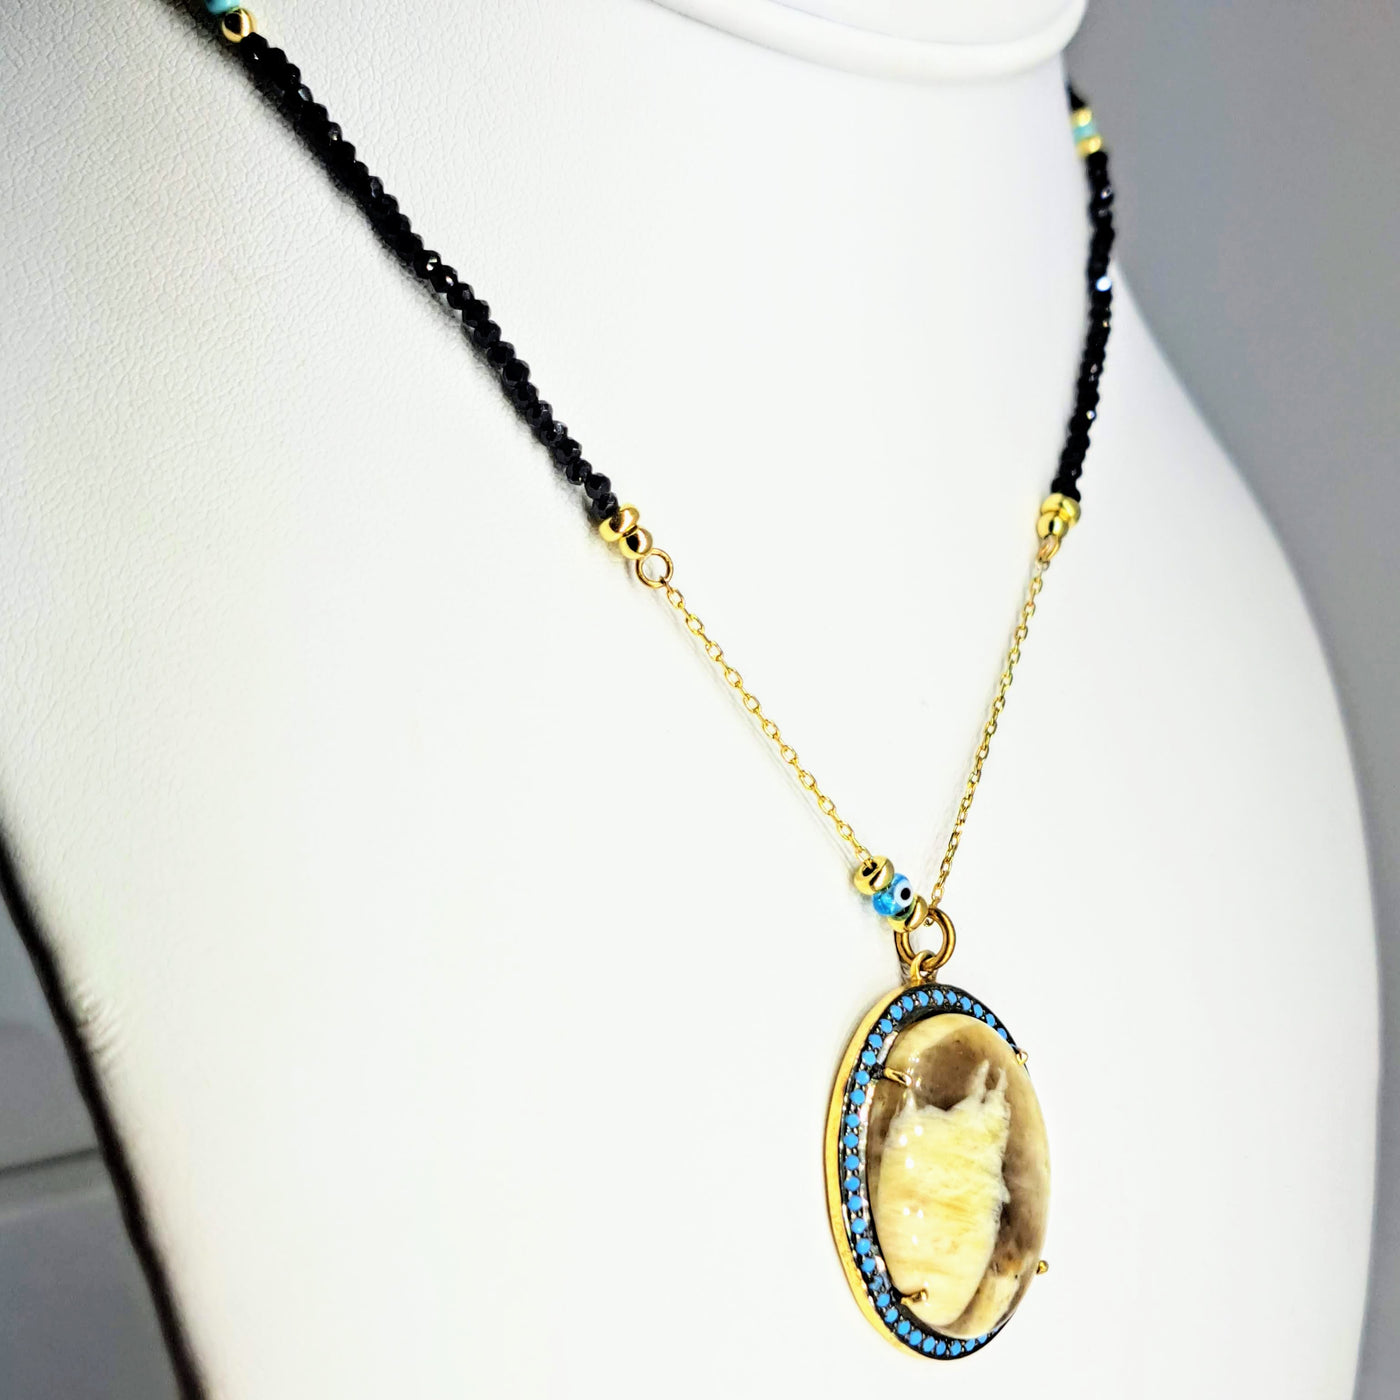 "Eye On The Nut" 15"-17" Necklace - Petrified Peanut Wood, Black Spinel, Nano Turquoise, Lamp-worked Glass,  Gold Sterling